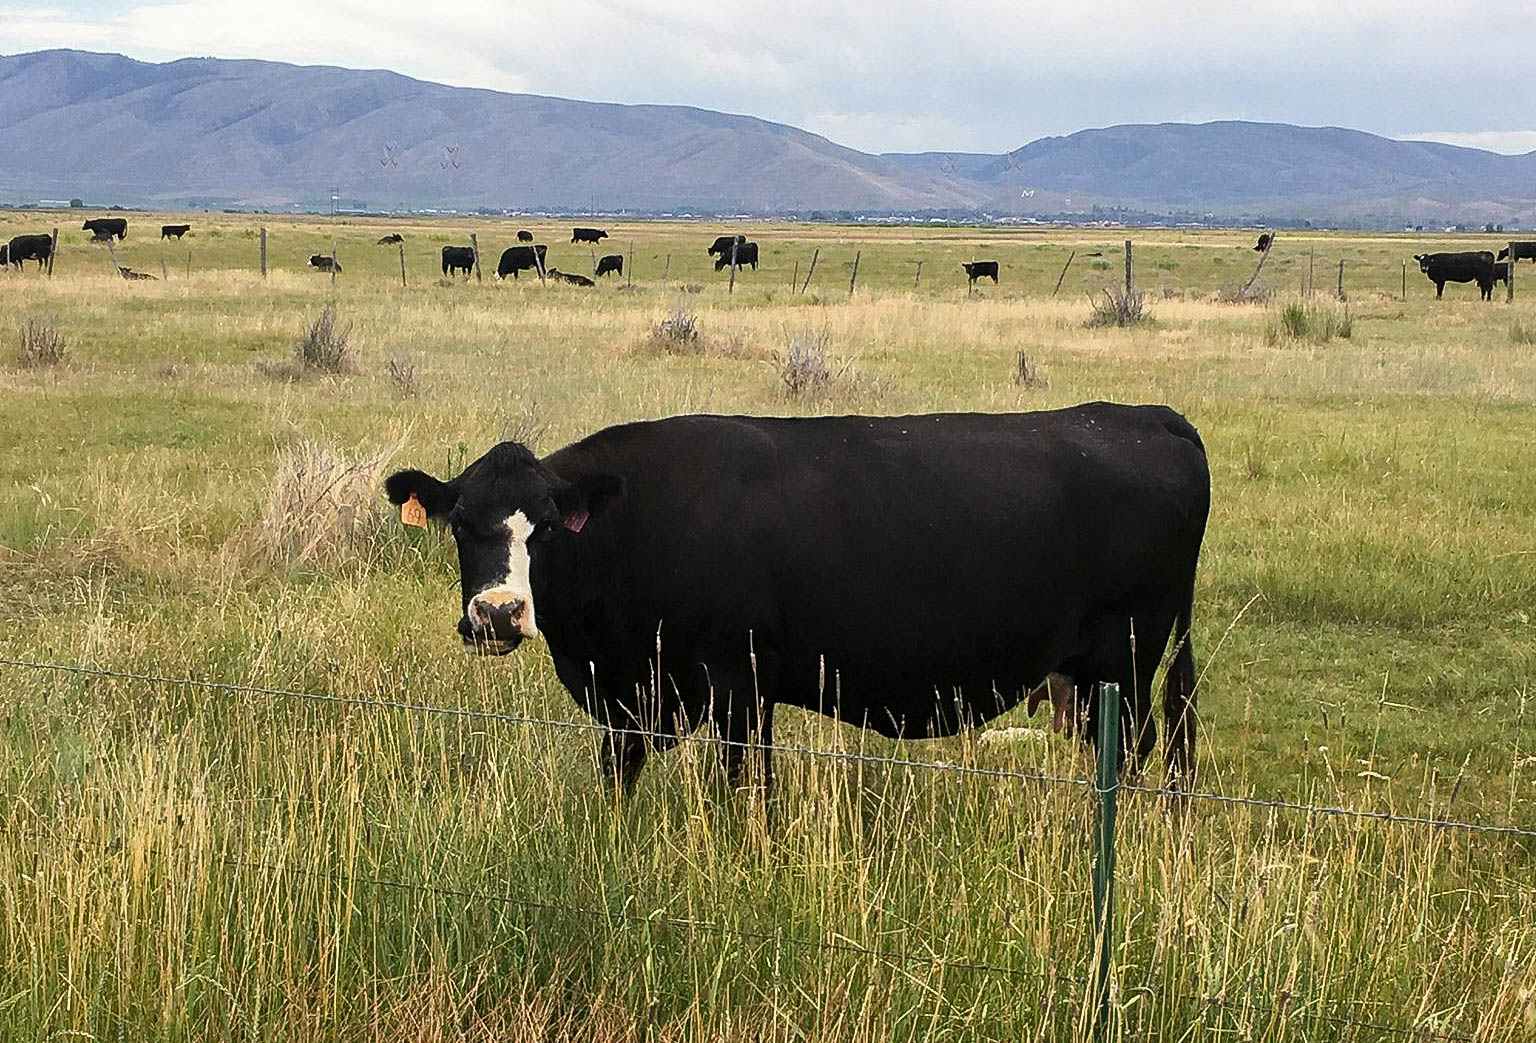 Cow in a pasture eating grass.